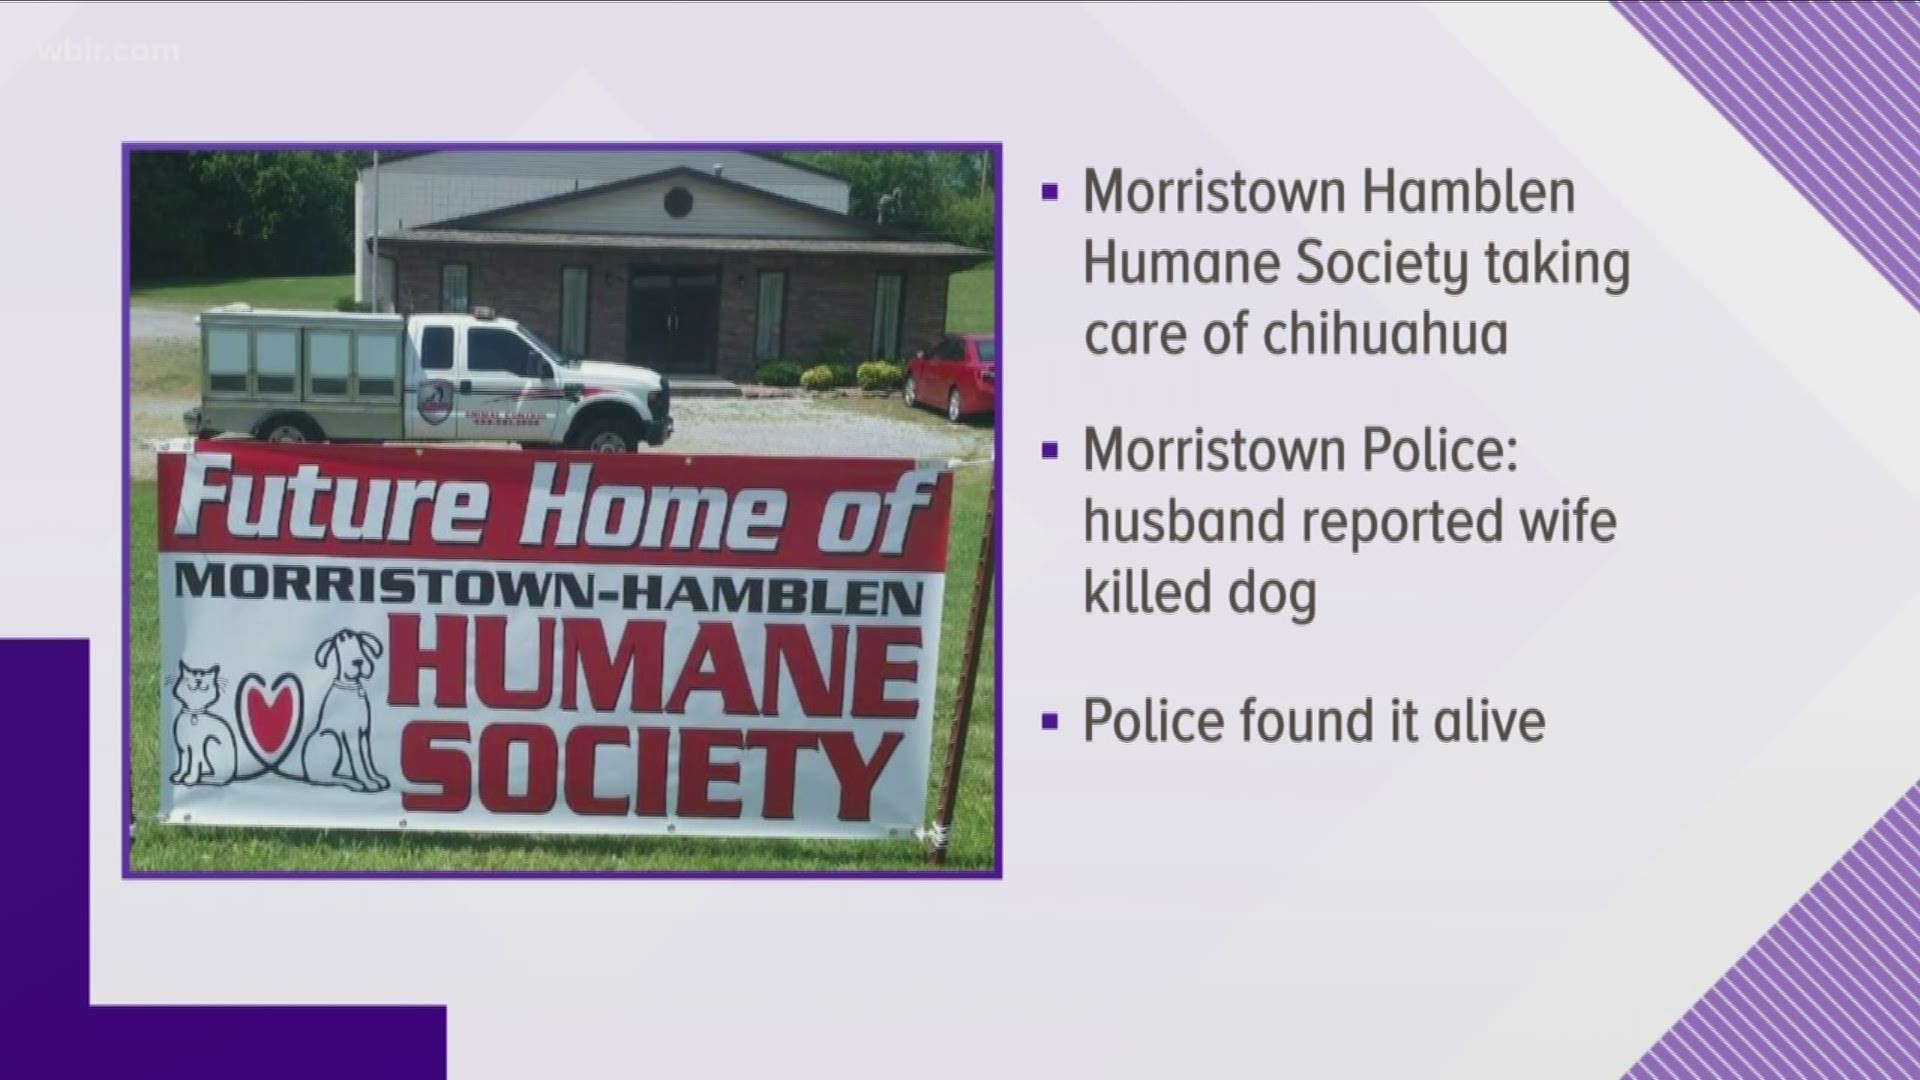 The couple was arrested and charged with animal cruelty after a Chihuahua  was found badly hurt in a garbage bag.